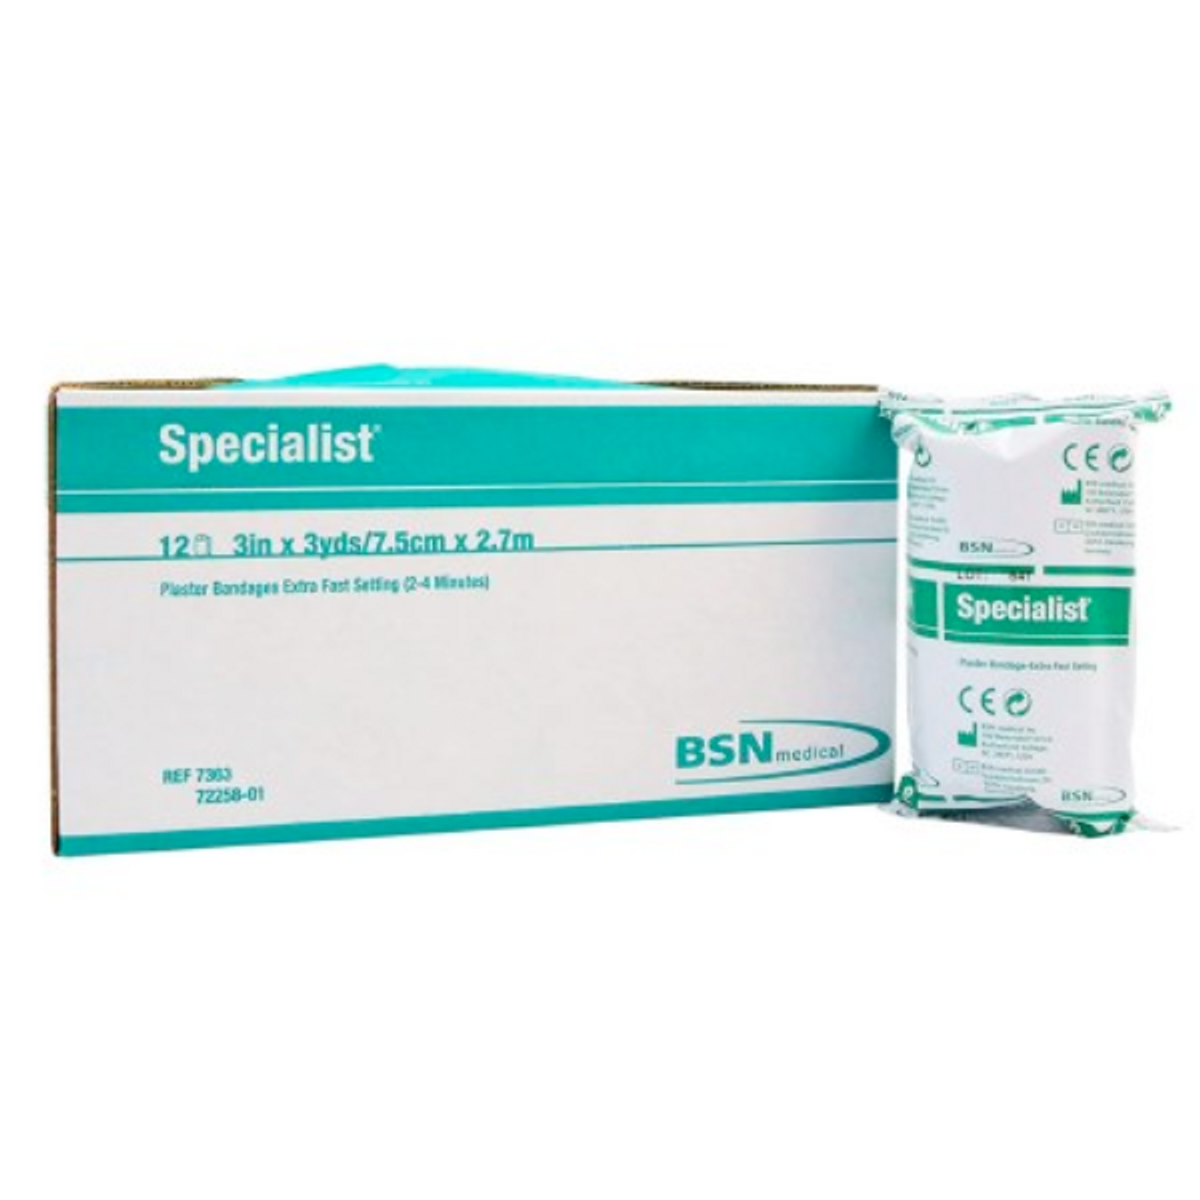 BSN Medical Specialist Plaster Bandages & Splints, Extra Fast Setting